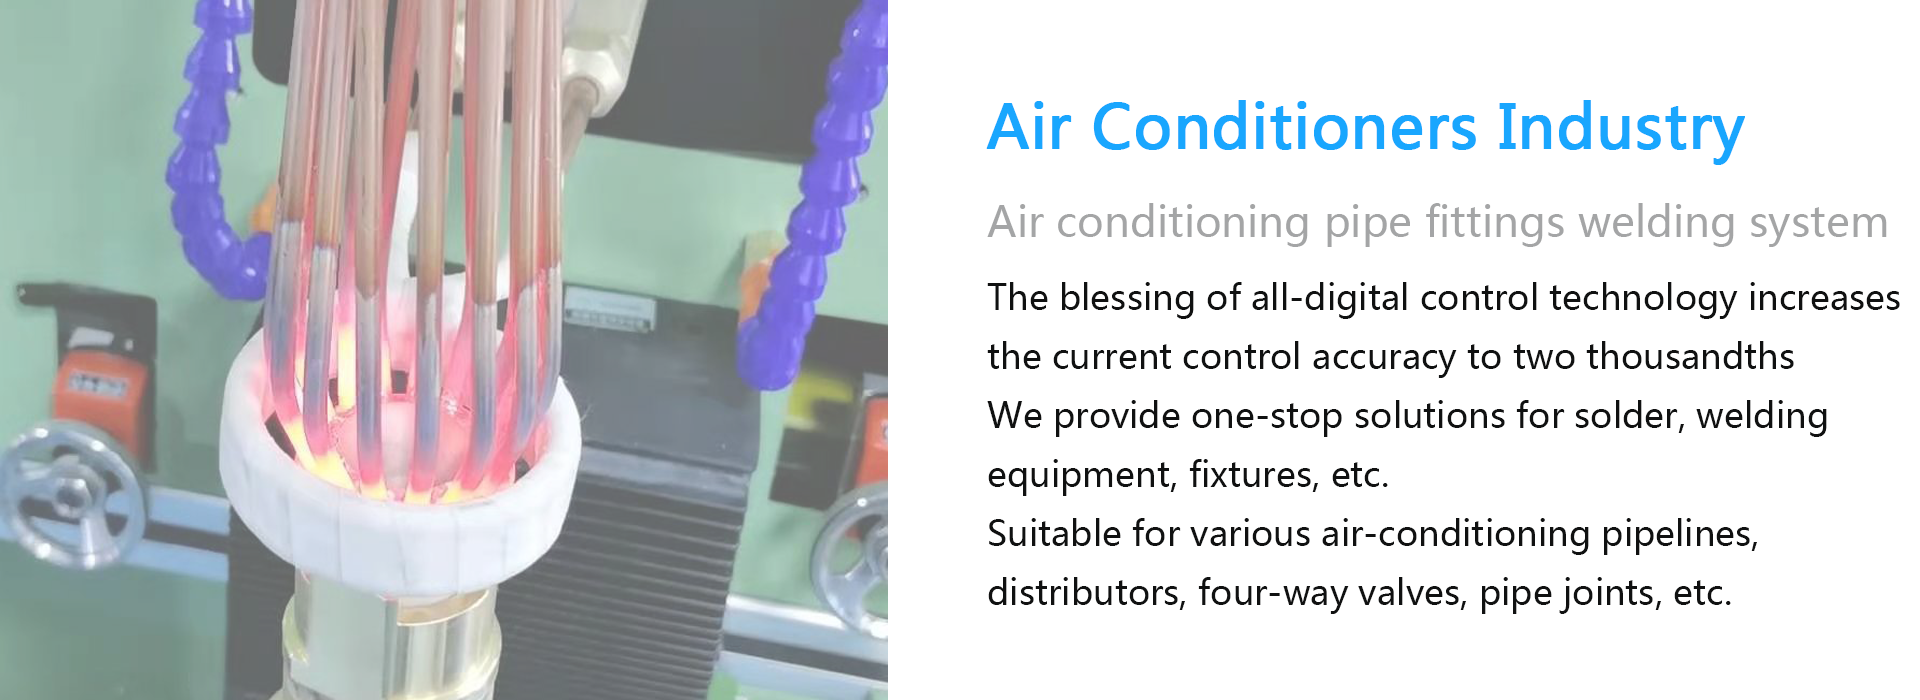 Air Conditioners Industry